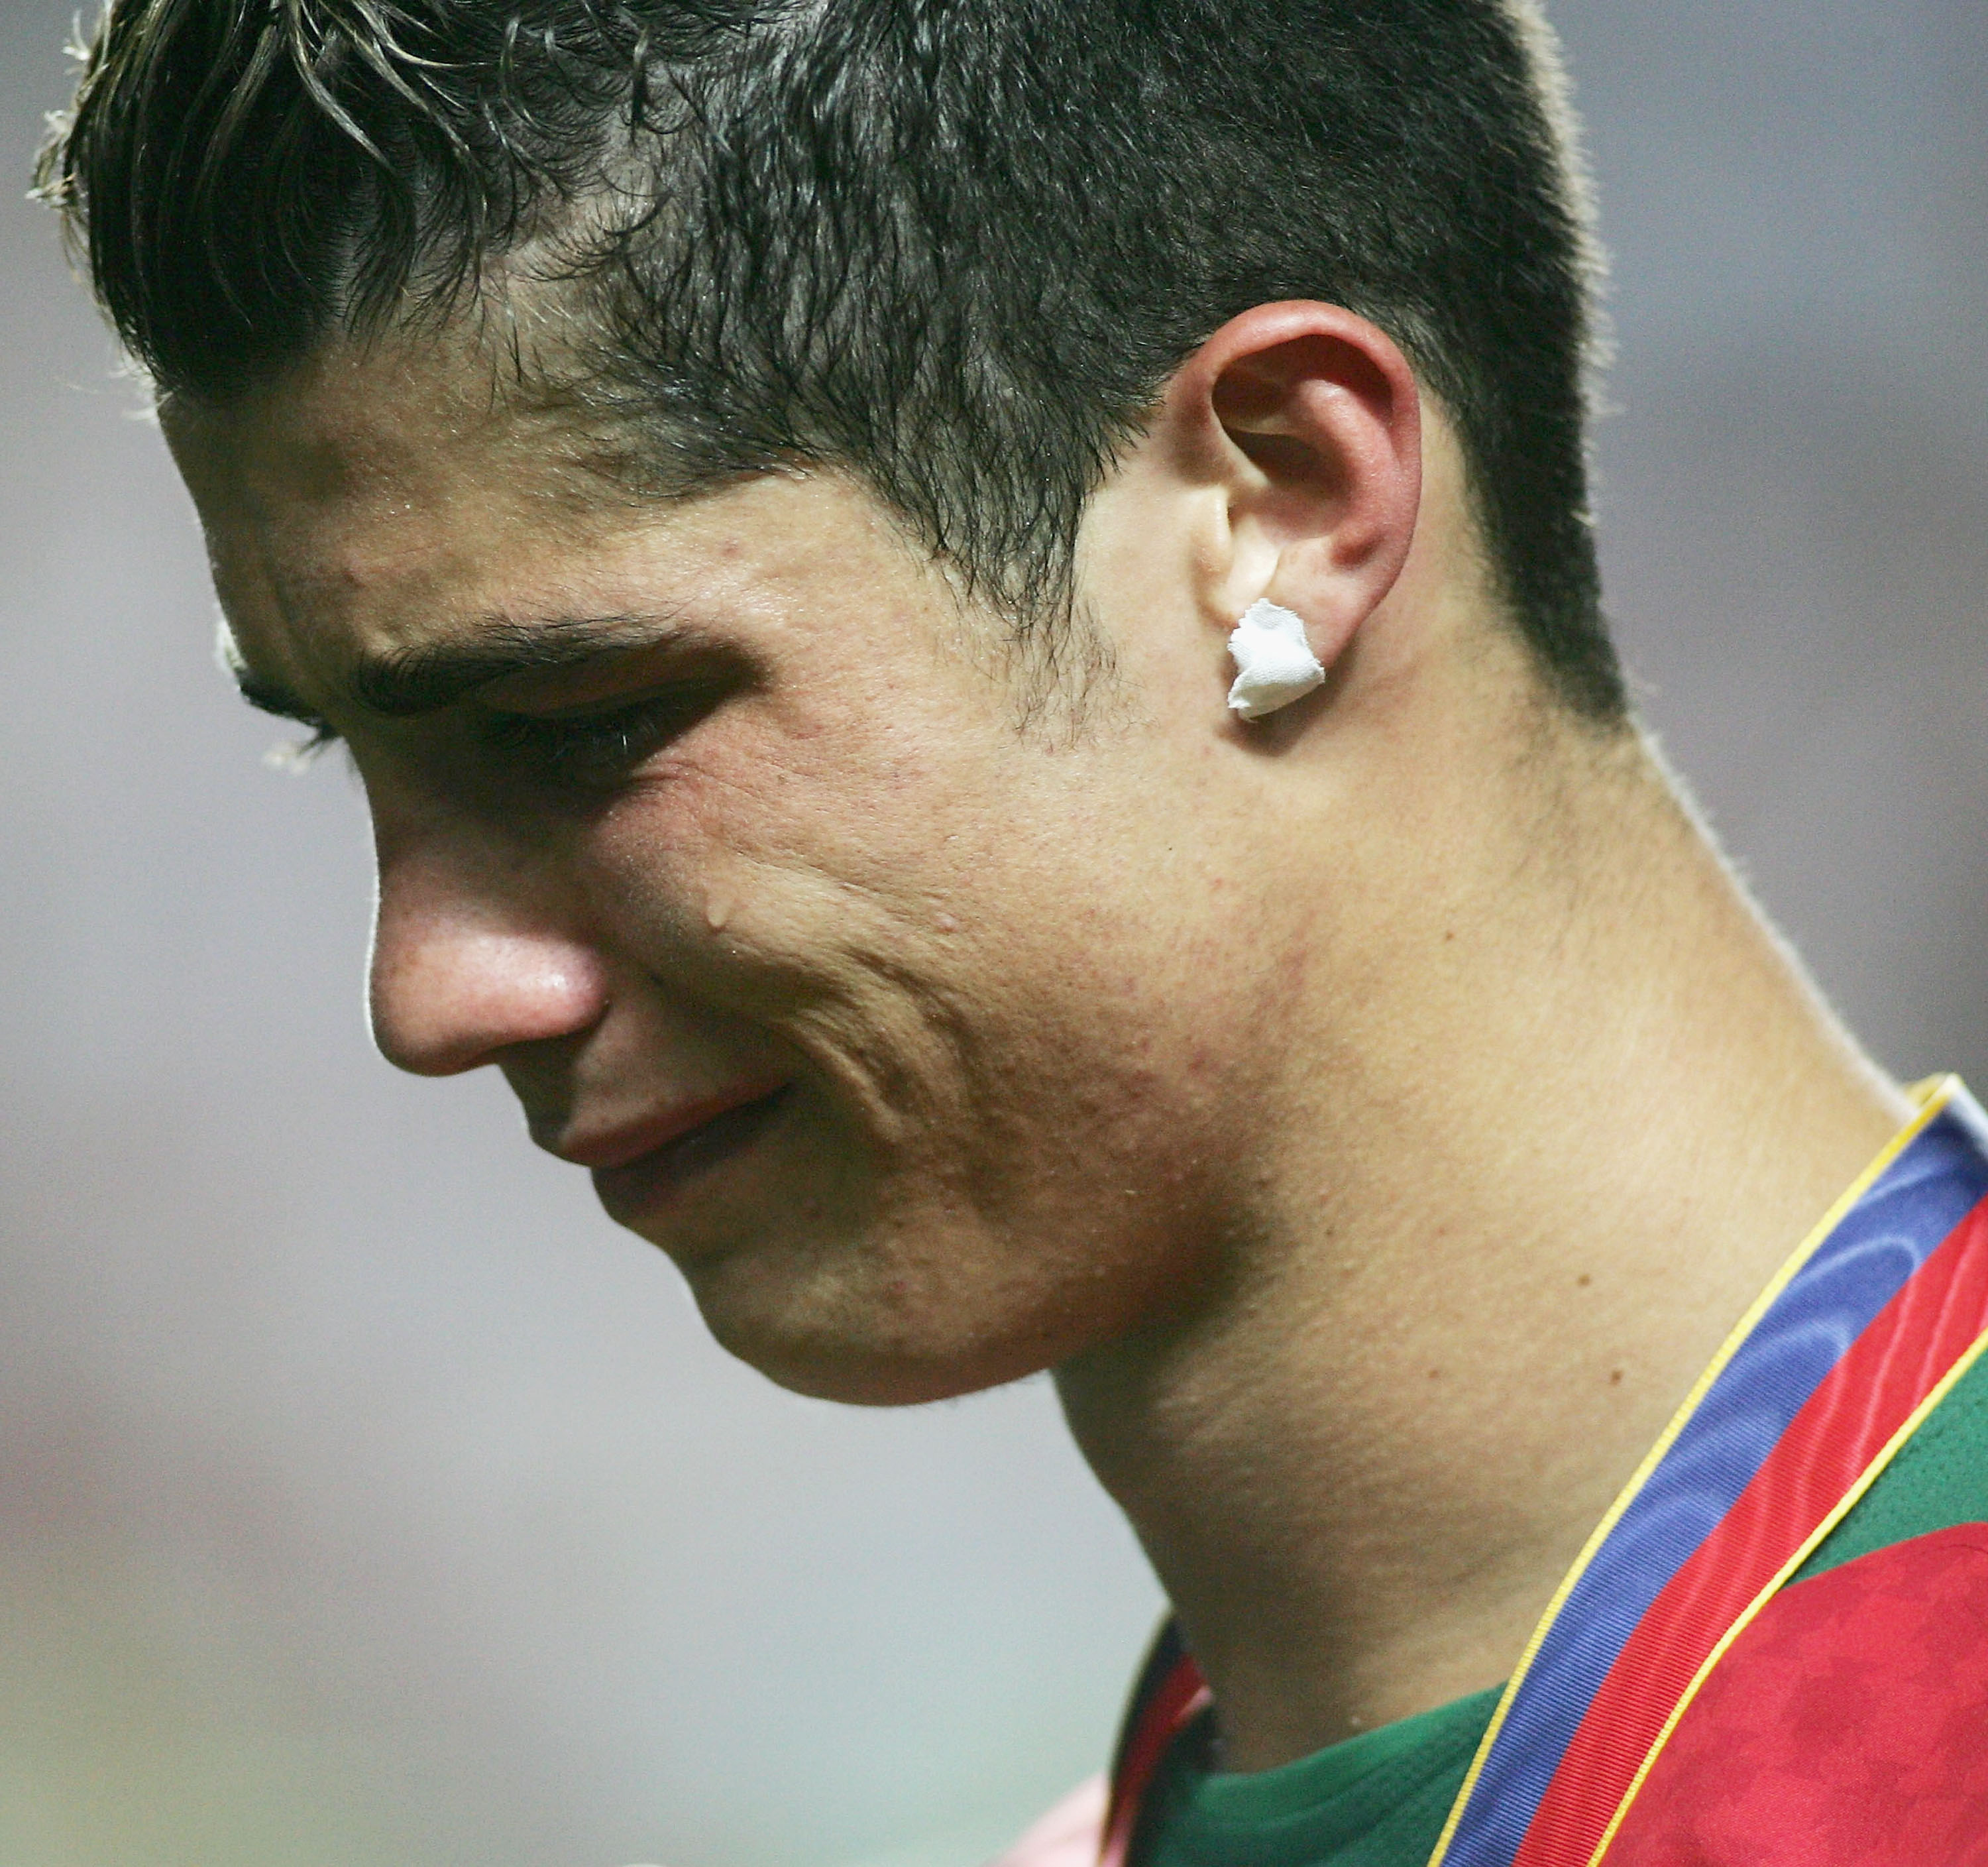 Cristiano Ronaldo during the Euro Final: Portugal vs. Greece in Lisbon, Portugal on July 4, 2004 | Source: Getty Images